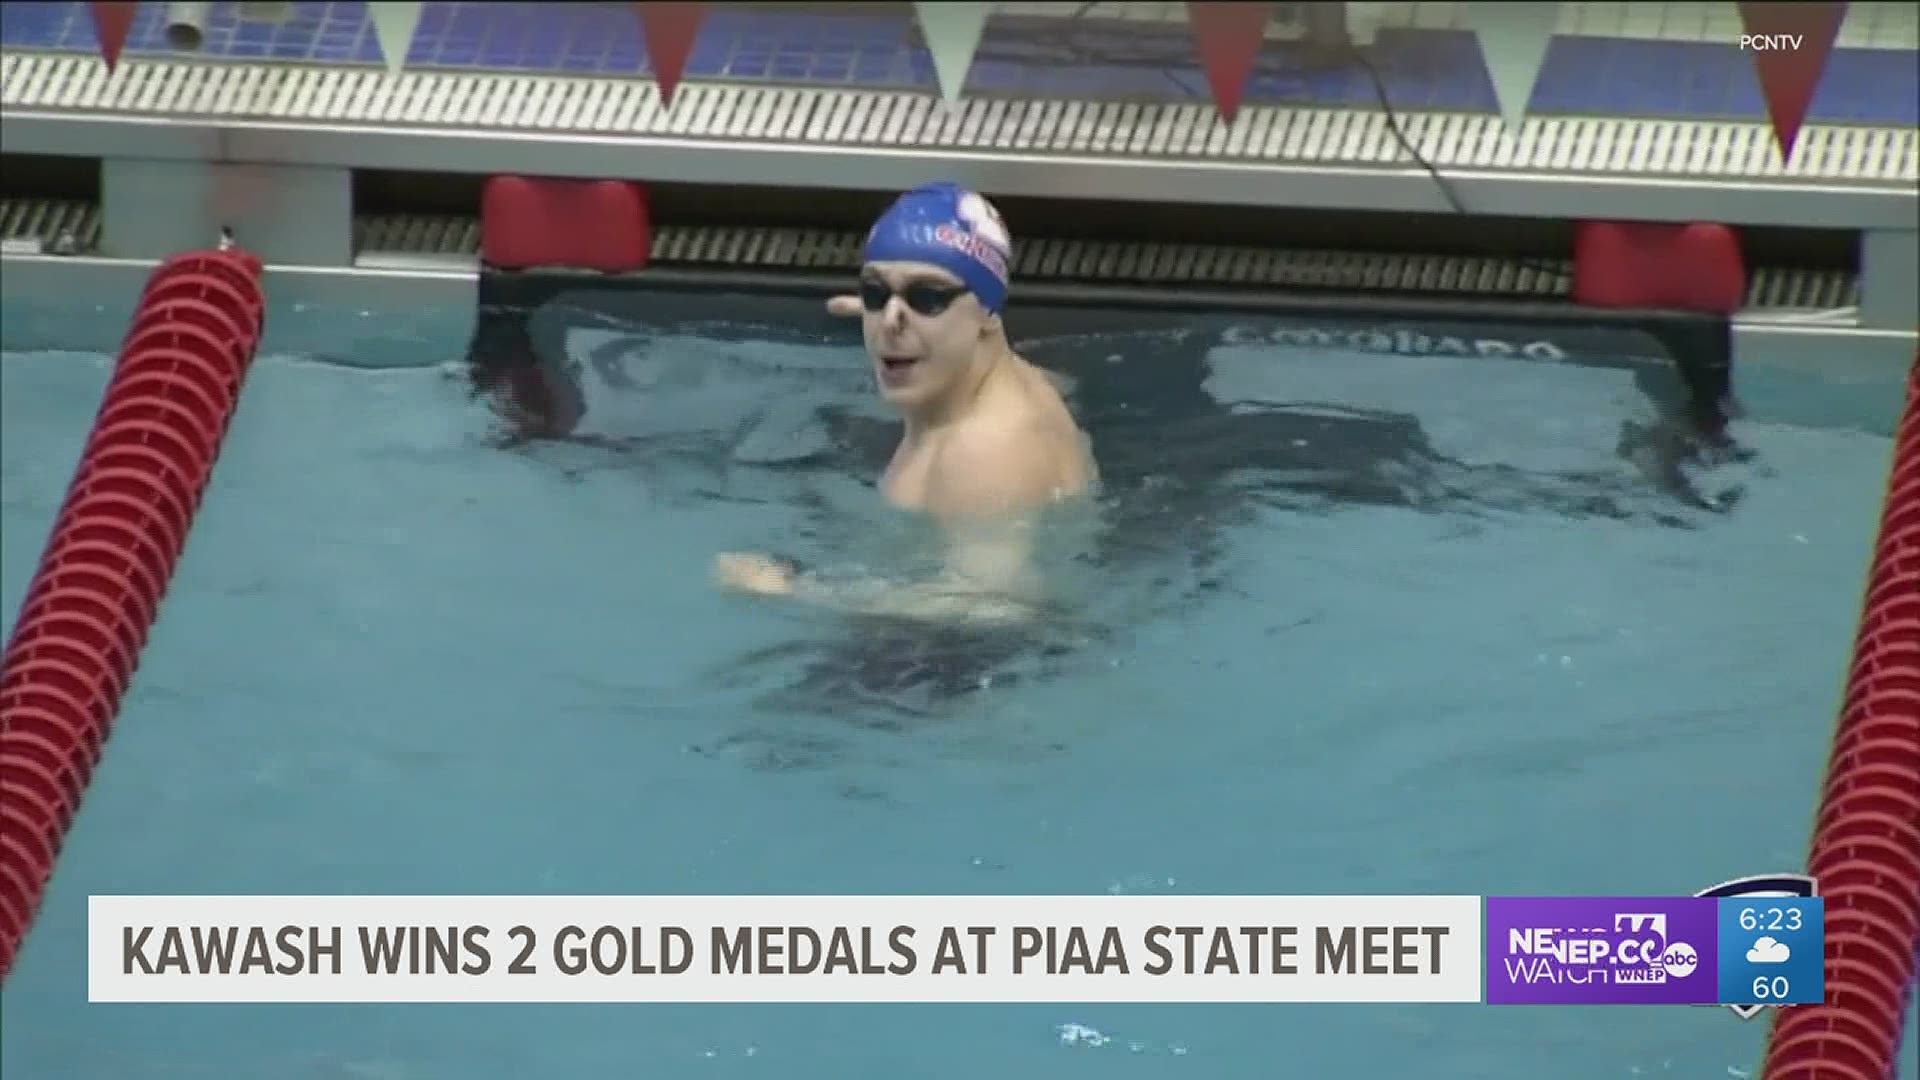 Peter Kawash of Lakeland wins two gold medals at the PIAA 'AA' Swim Championships despite not having a pool at school.